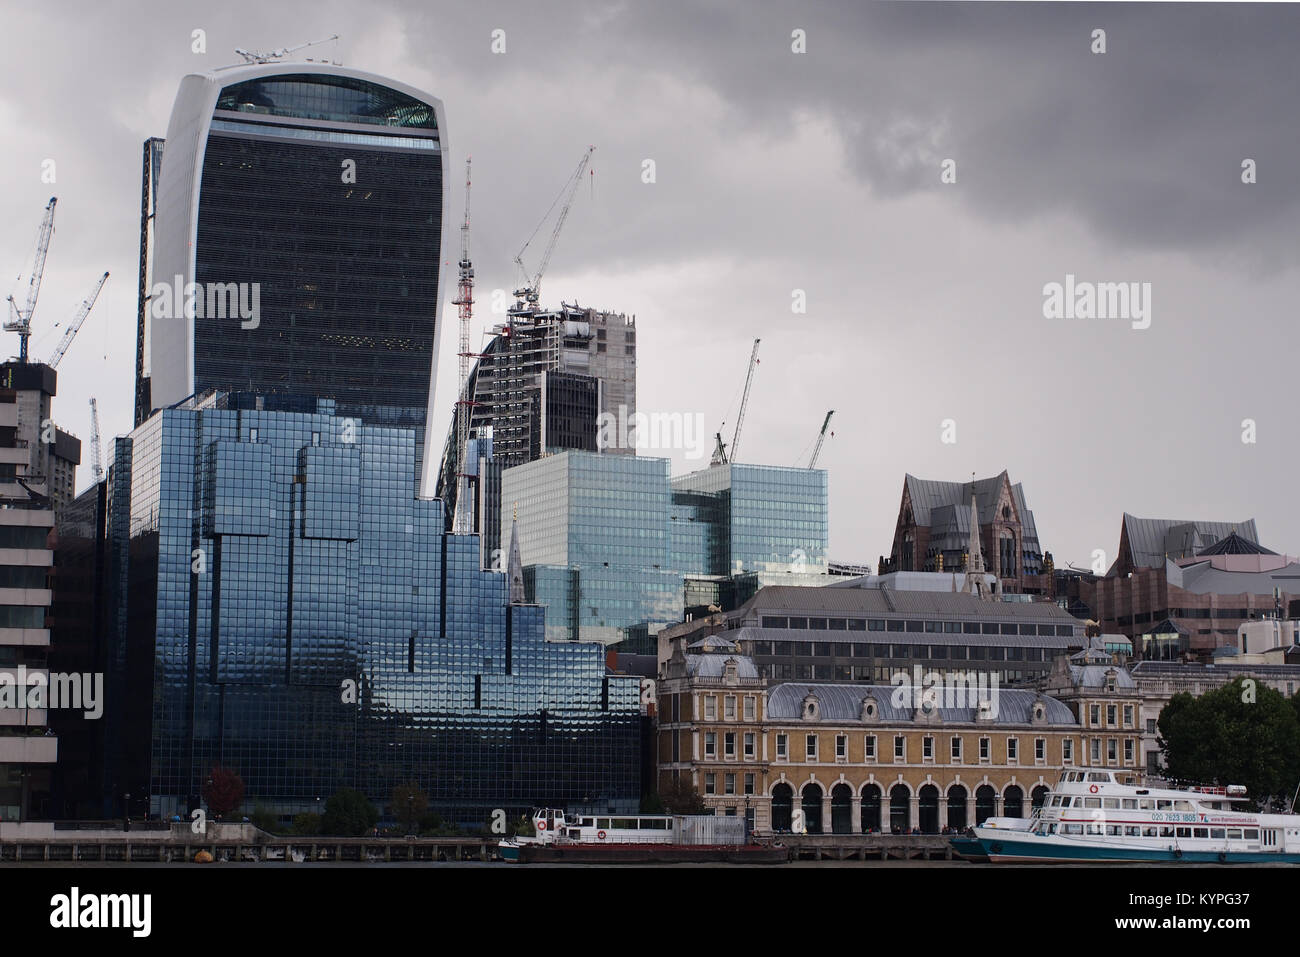 A view over to the city of London with Thames river boats in the foreground taken from the southern bank of the Thames near London Bridge Stock Photo